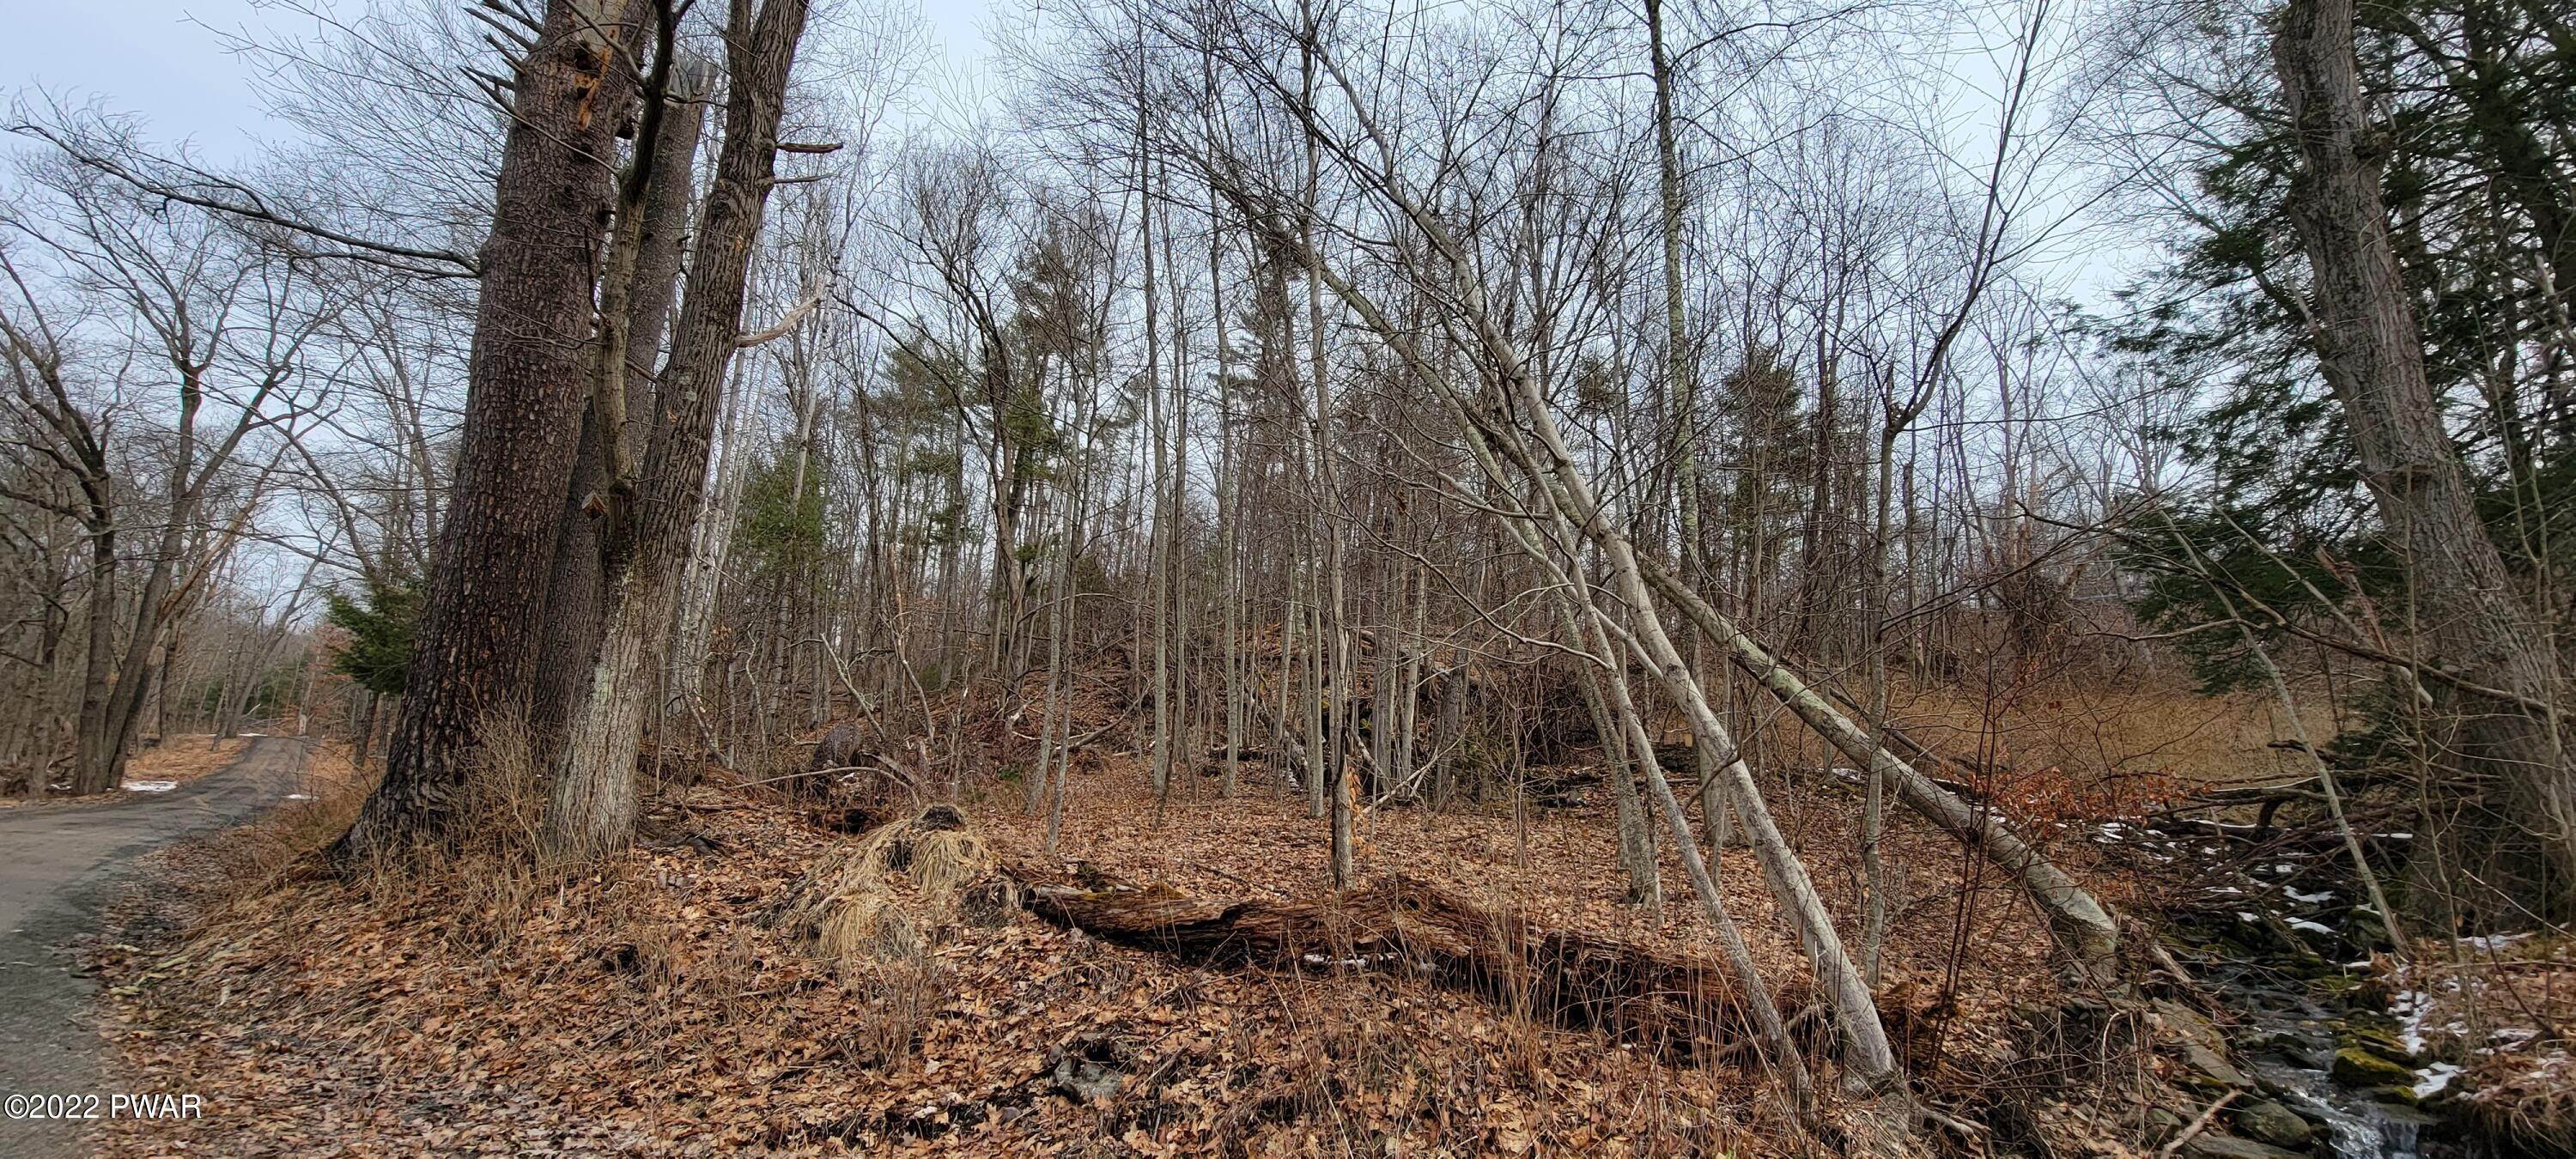 14. Land for Sale at Lot 5.2 Humphrey Rd Narrowsburg, New York 12764 United States